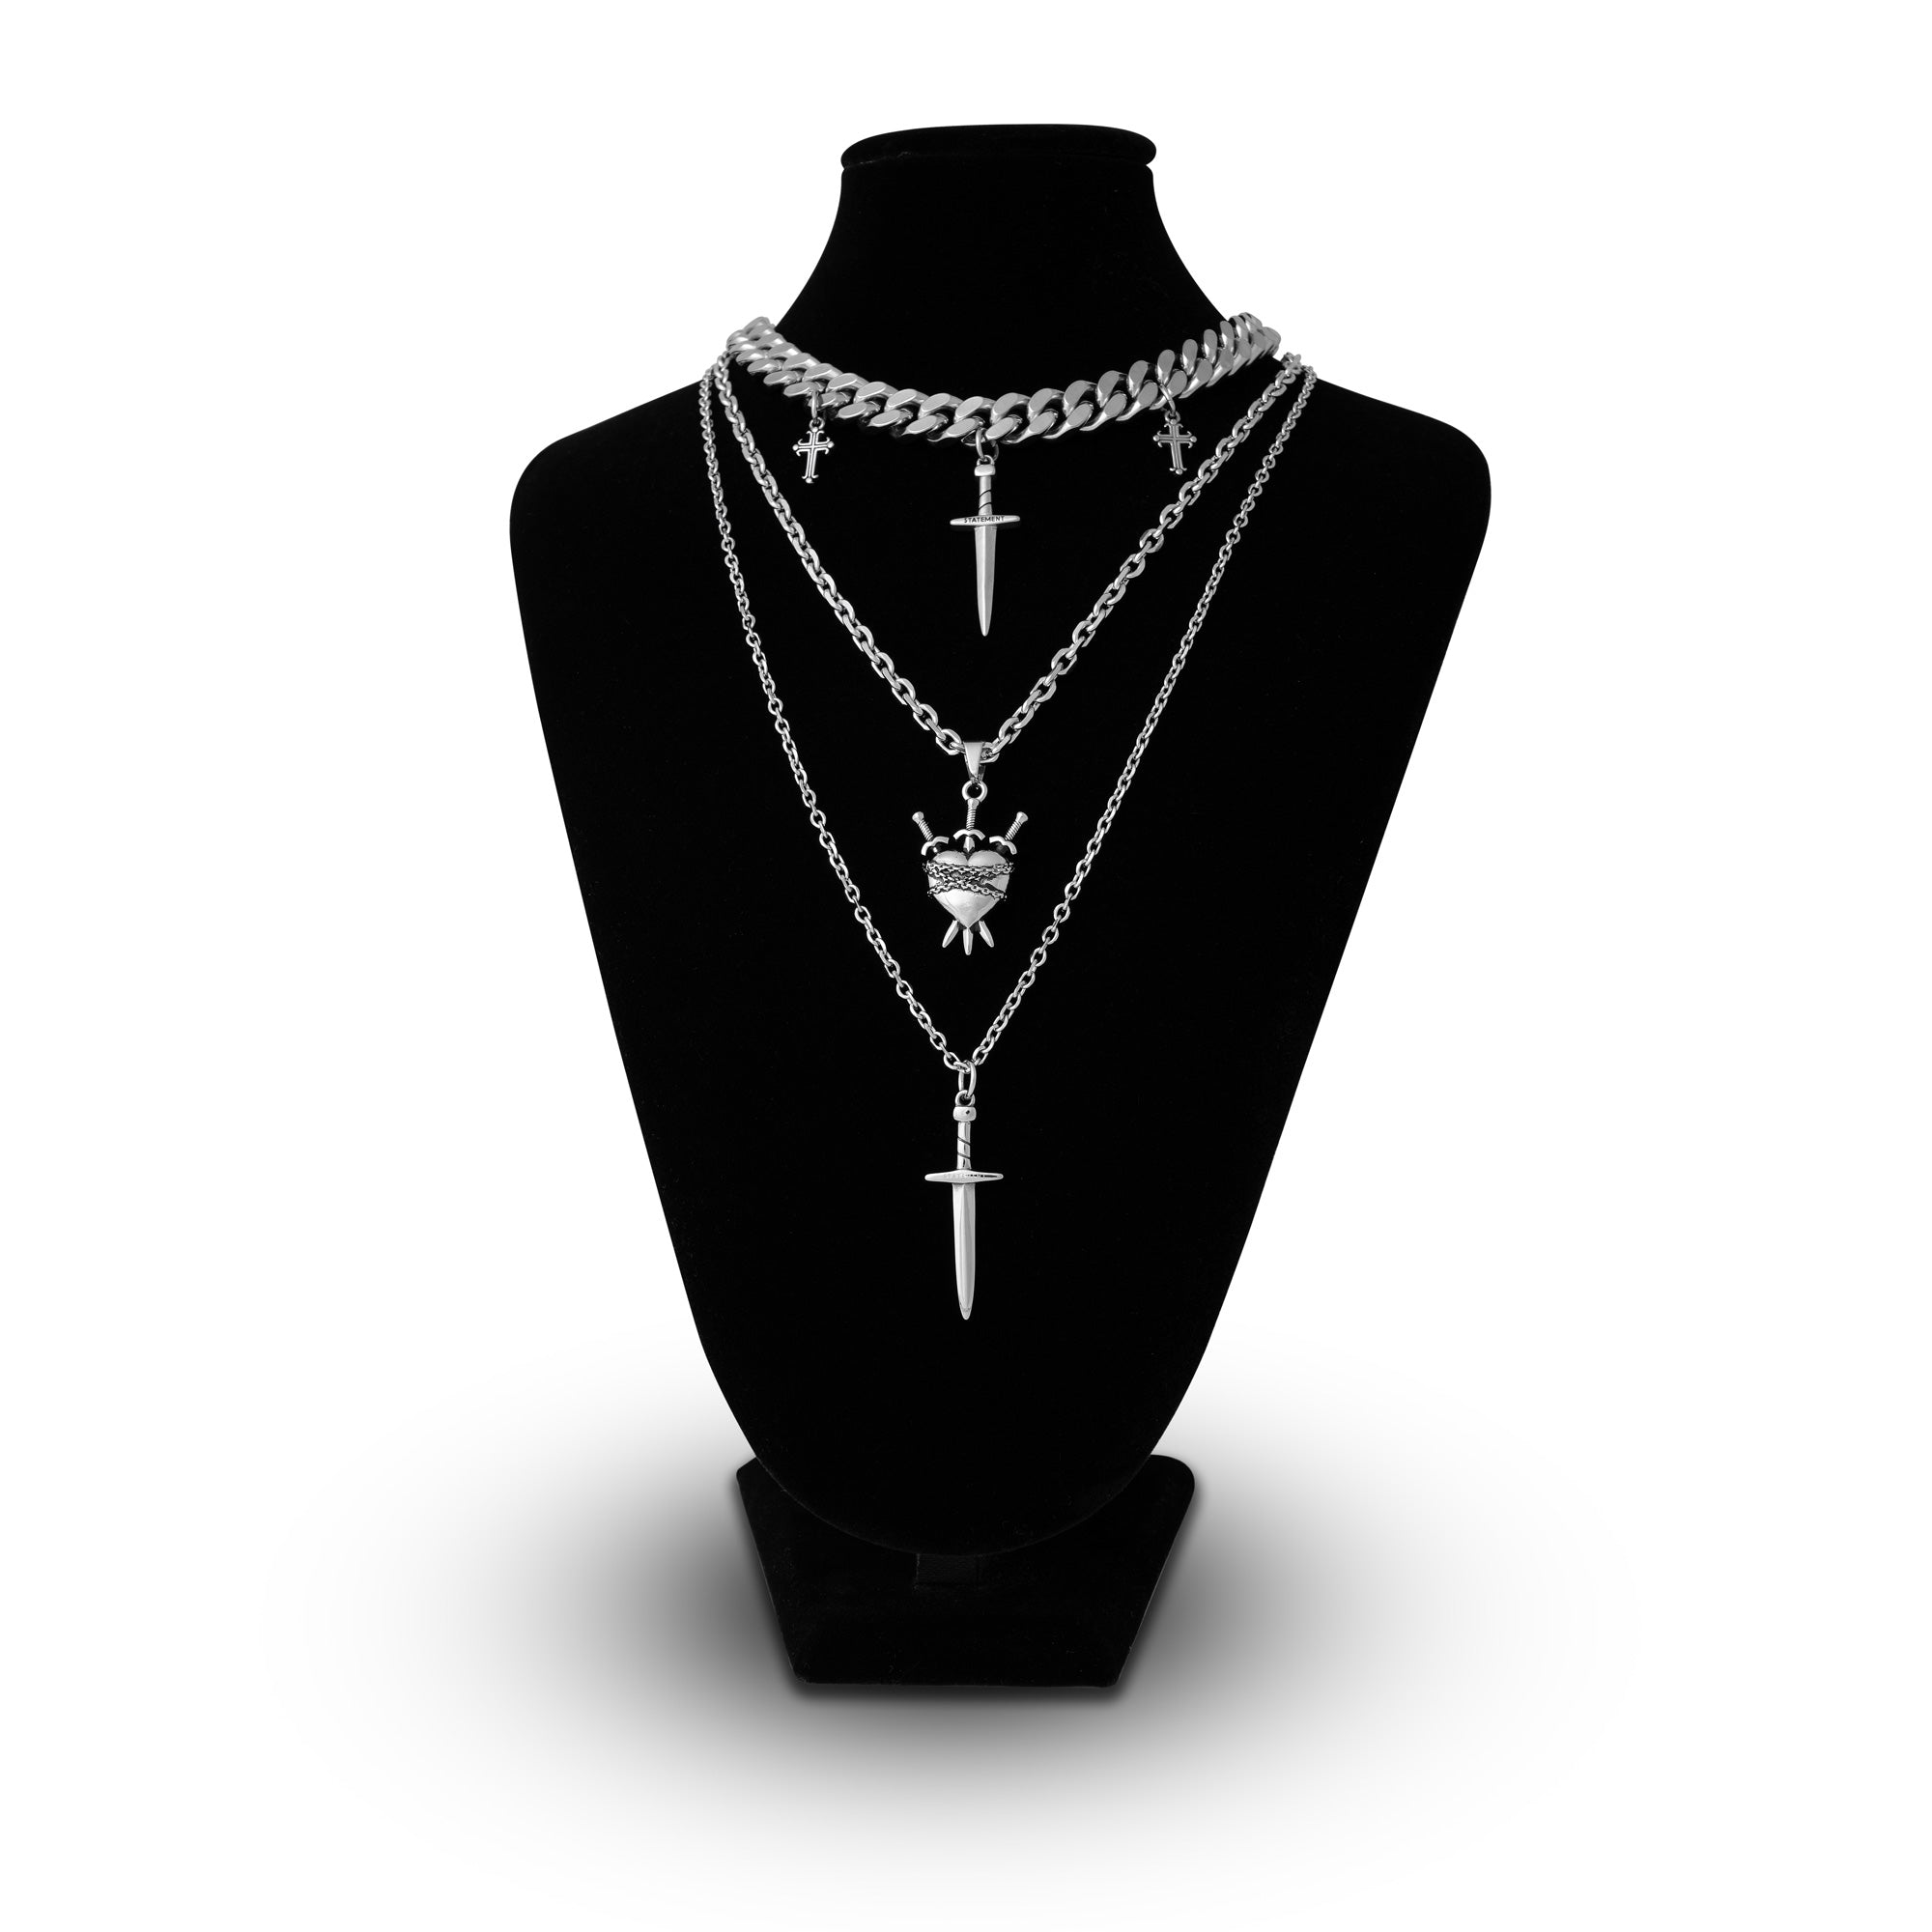 Gothic silver necklace set with sword pendants by Statement Collective